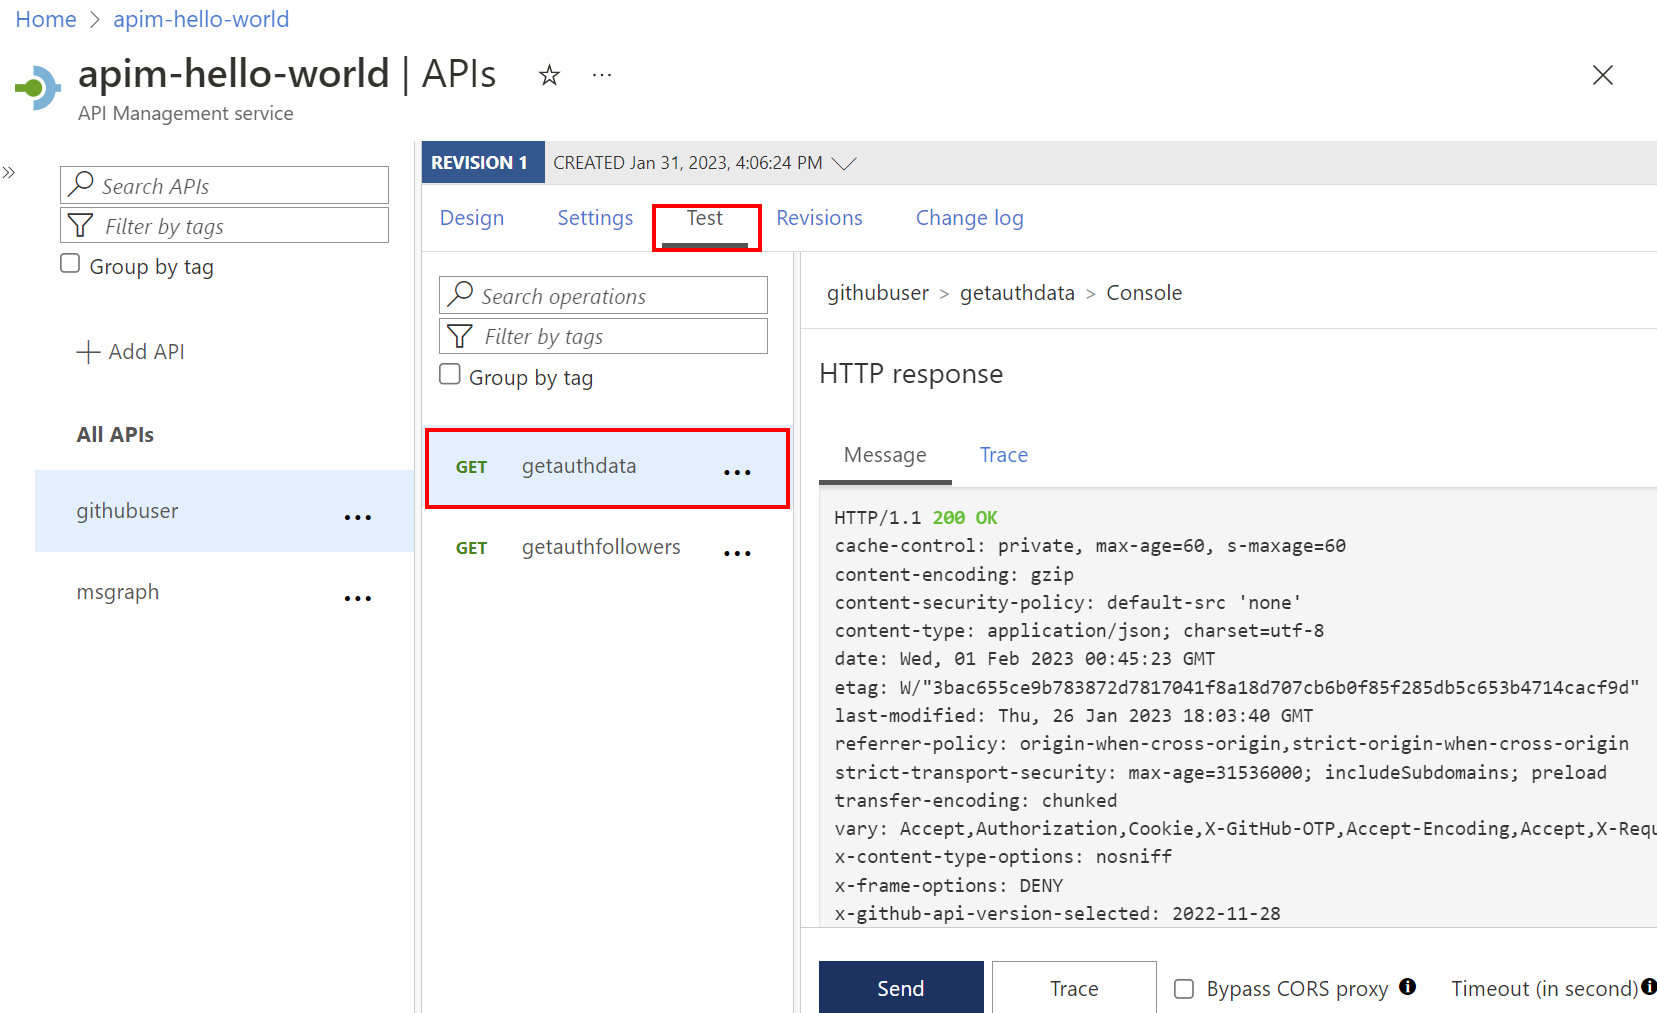 Screenshot of testing the API successfully in the portal.